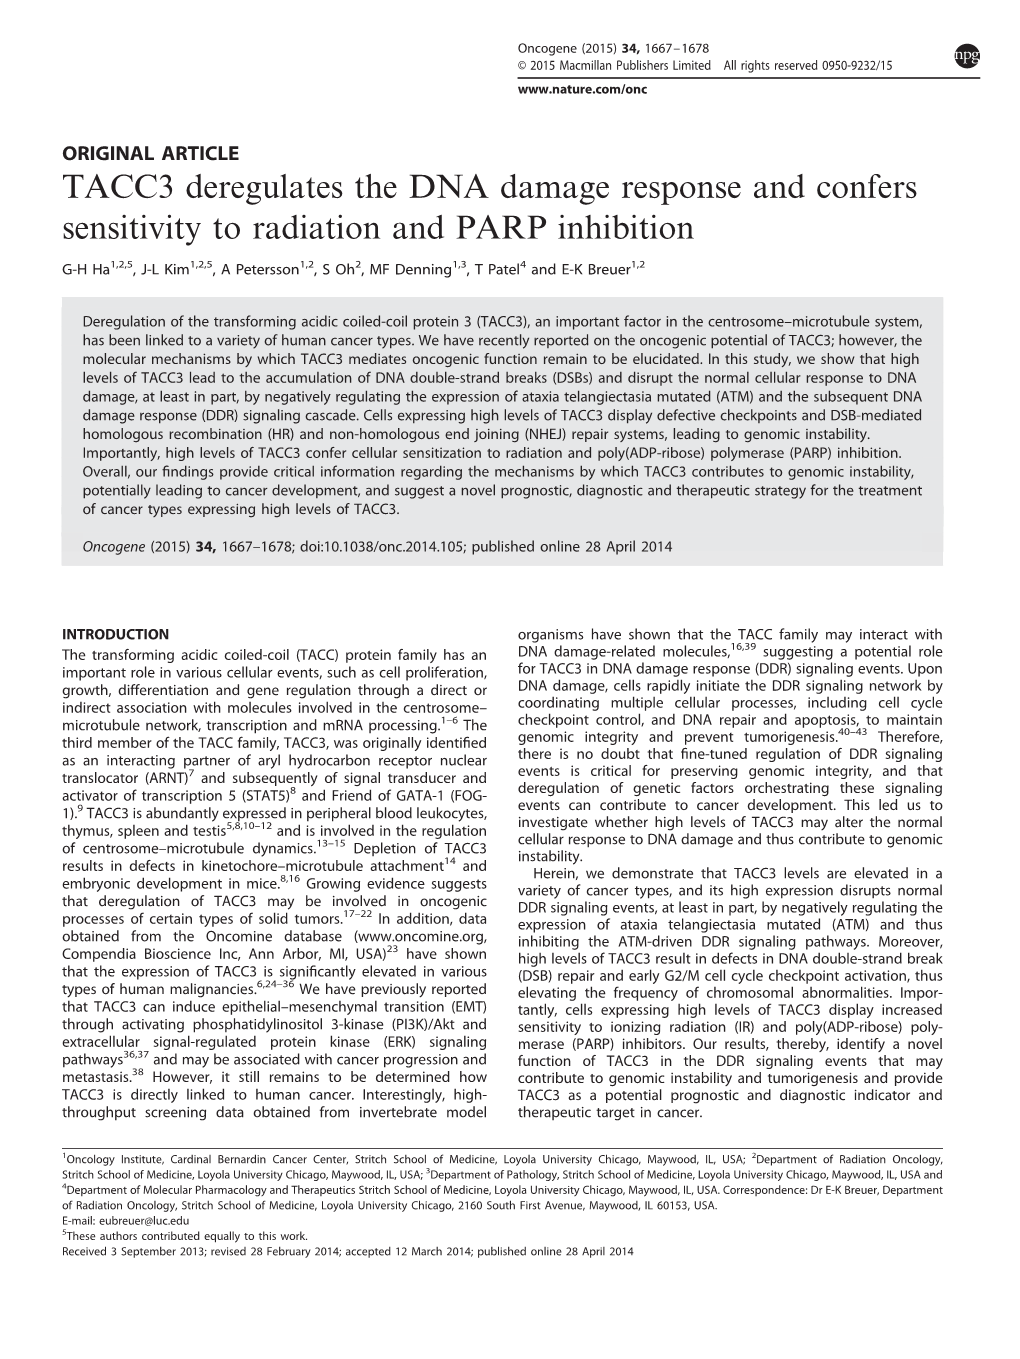 TACC3 Deregulates the DNA Damage Response and Confers Sensitivity to Radiation and PARP Inhibition